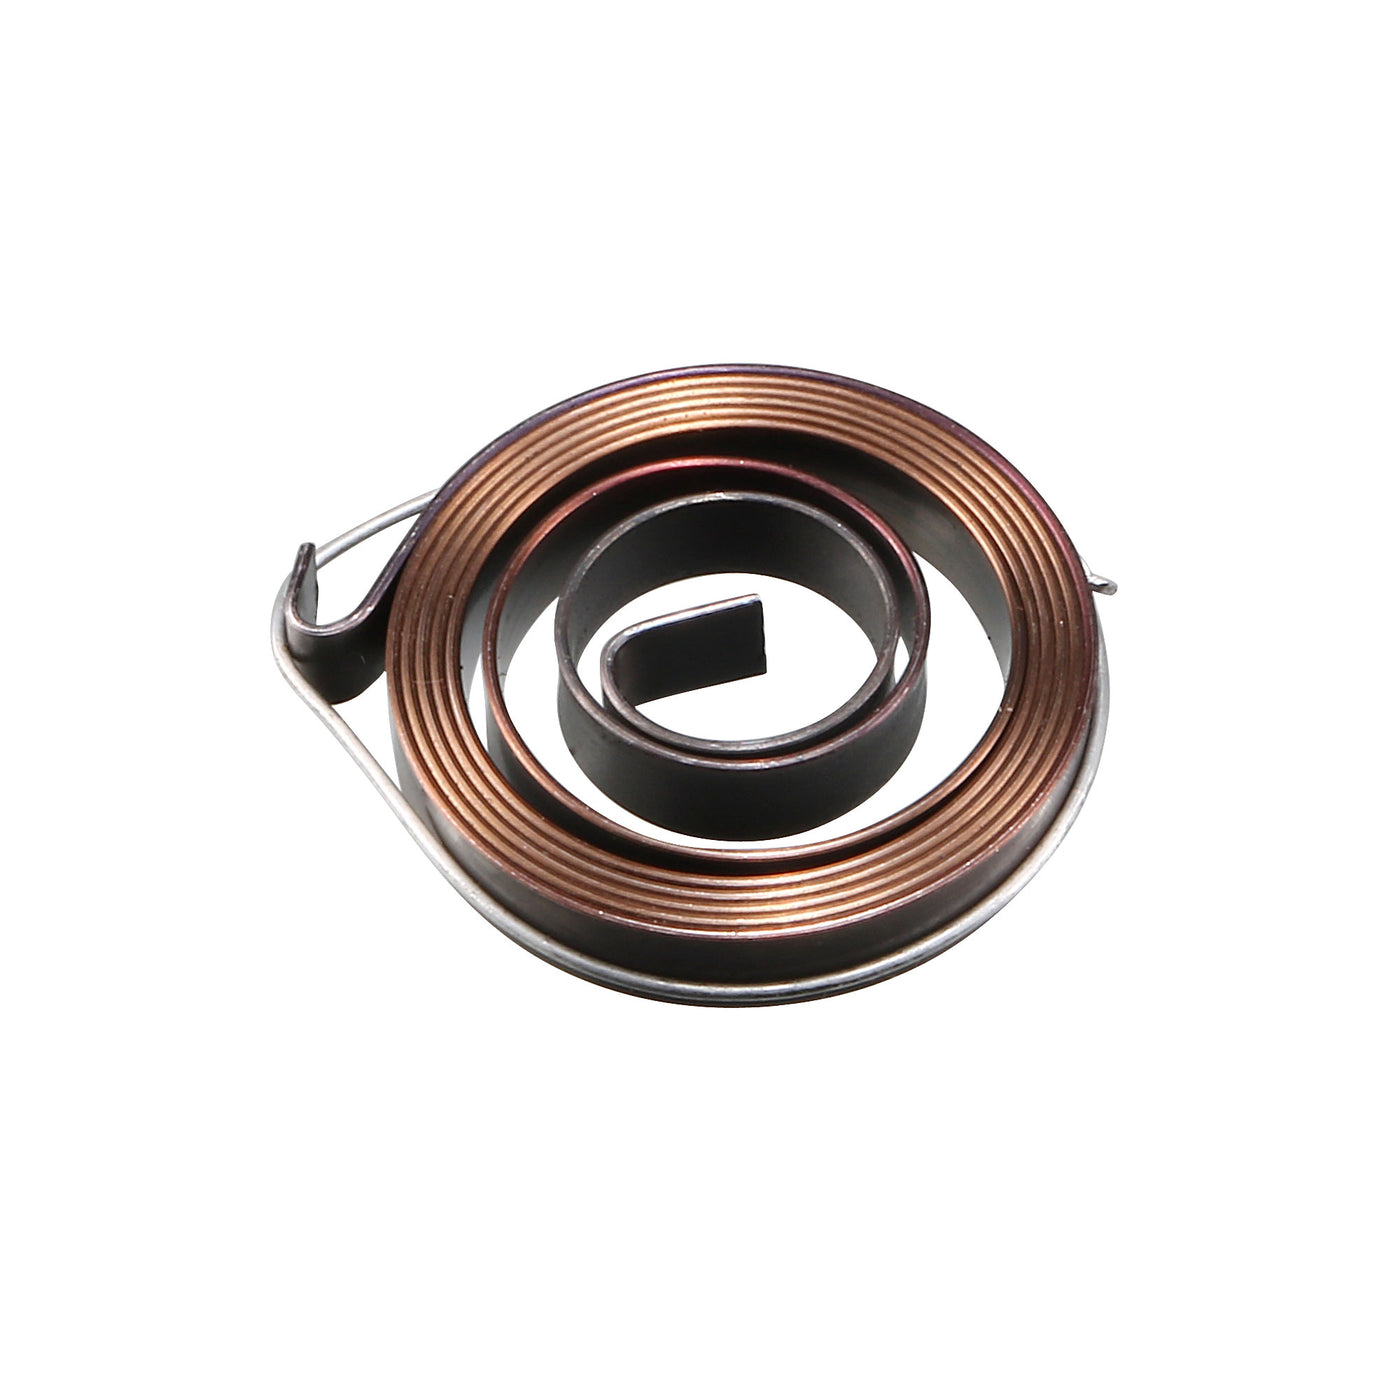 uxcell Uxcell Metal Drill Press Quill Feed Return Coil Spring Assembly 34mm